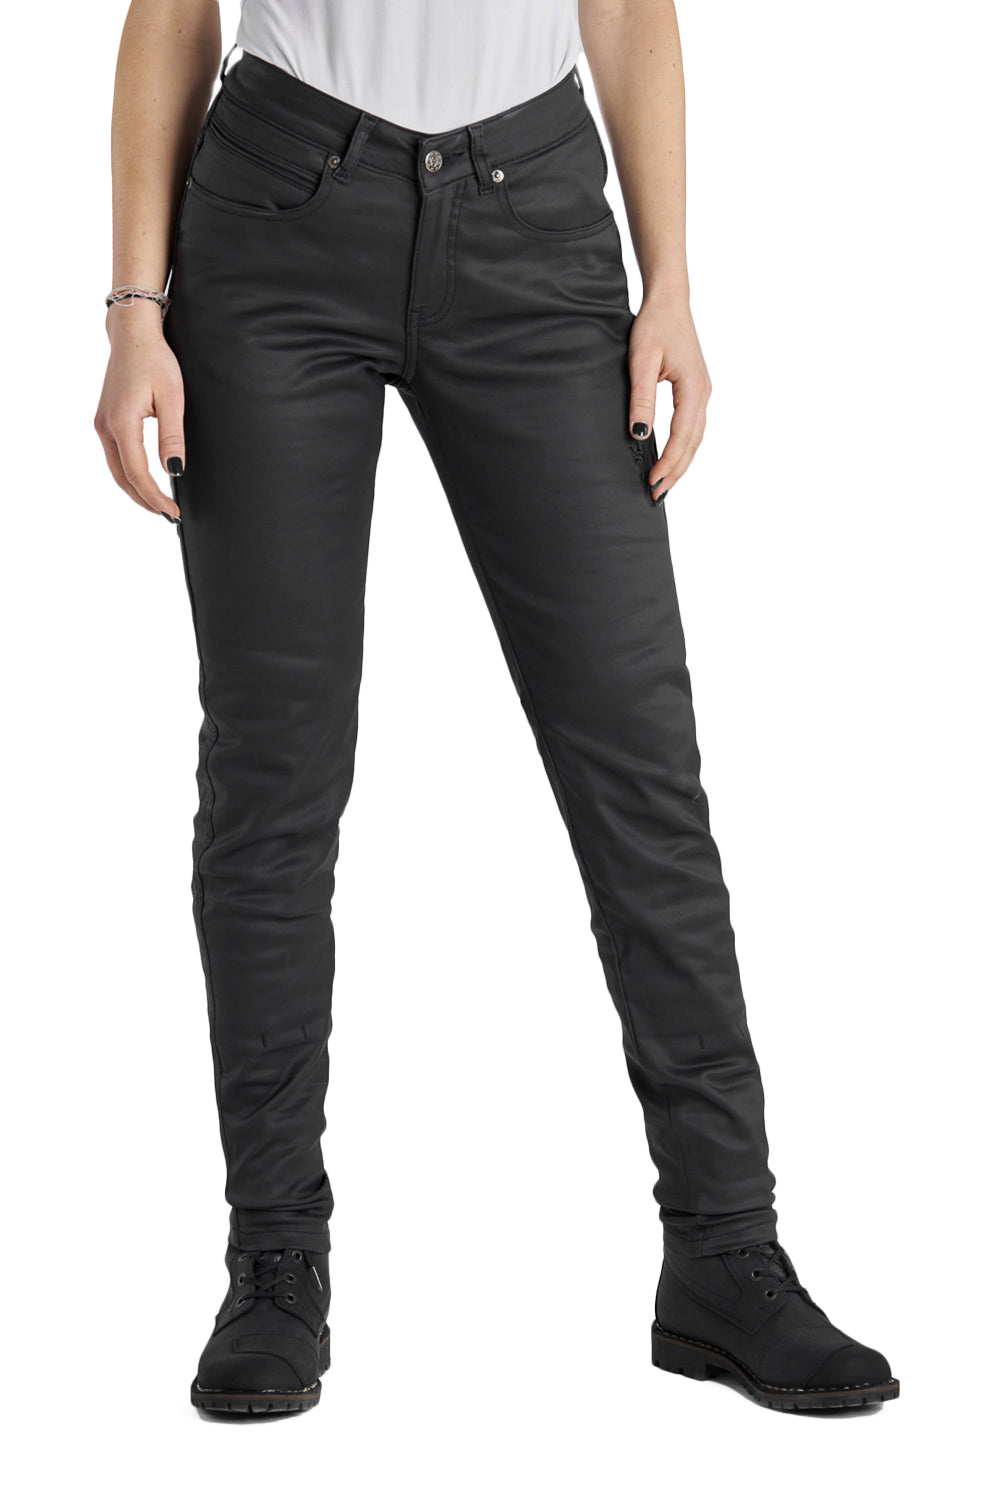 Atwyld Shred 2.0 Women's Armoured Leather Motorcycle Jeans